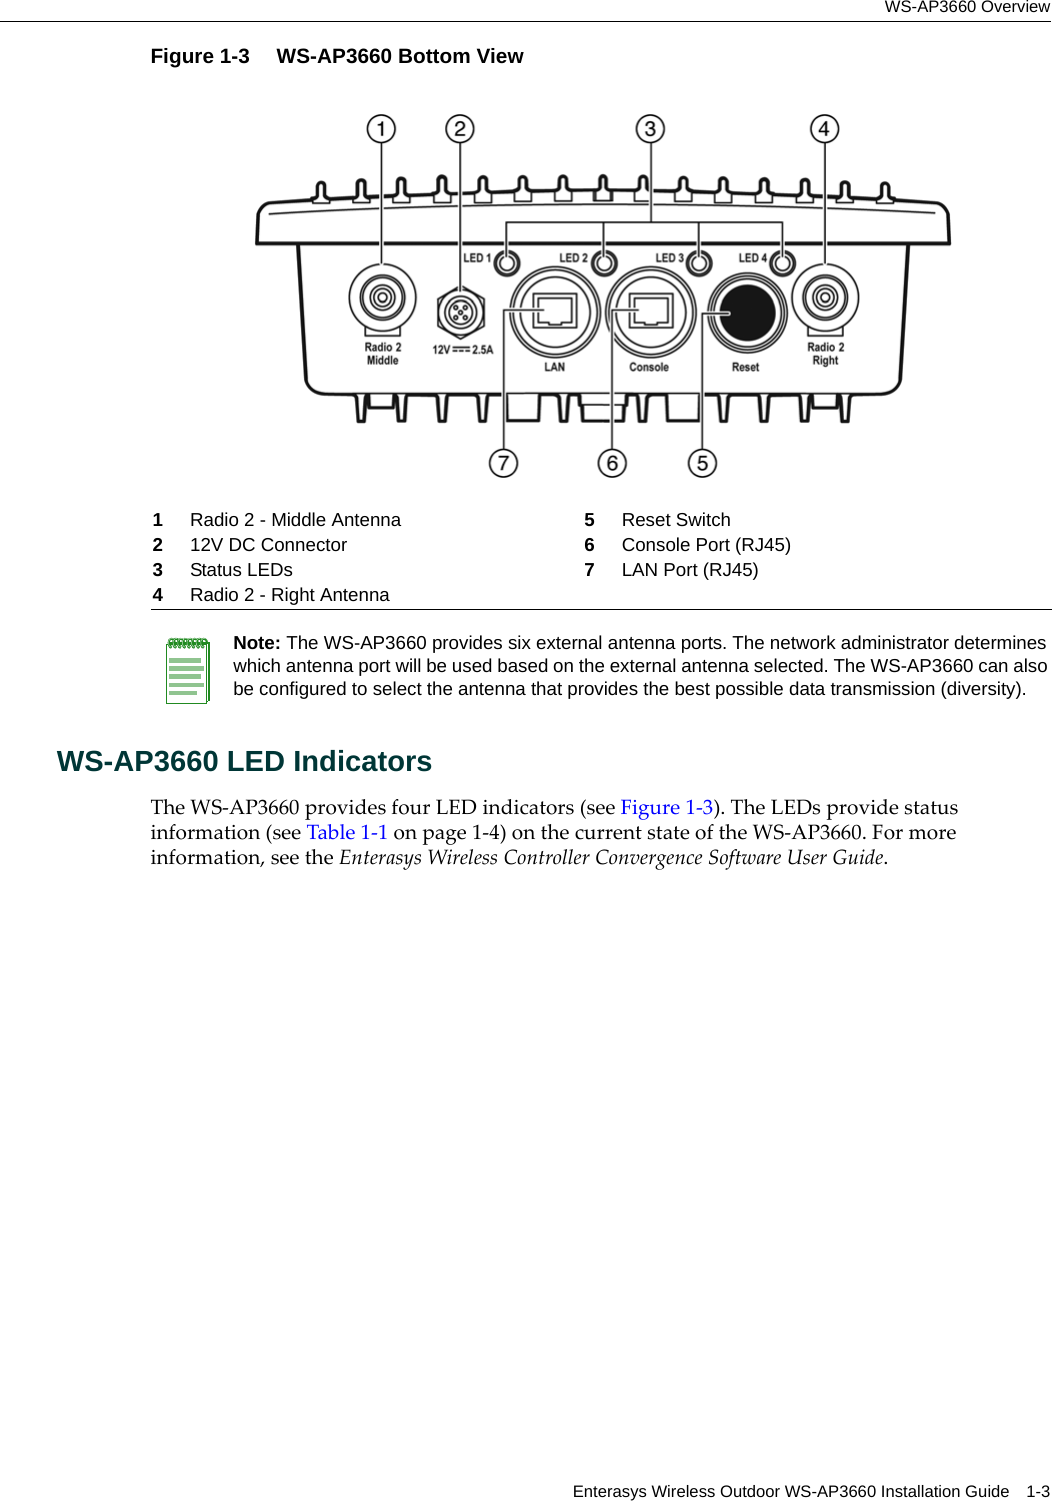 WS-AP3660 OverviewEnterasys Wireless Outdoor WS-AP3660 Installation Guide 1-3Figure 1-3  WS-AP3660 Bottom ViewWS-AP3660 LED IndicatorsThe WS-AP3660 provides four LED indicators (see Figure 1-3). The LEDs provide status information (see Table 1-1 on page 1-4) on the current state of the WS-AP3660. For more information, see the Enterasys Wireless Controller Convergence Software User Guide.1Radio 2 - Middle Antenna 5Reset Switch212V DC Connector 6Console Port (RJ45)3Status LEDs 7LAN Port (RJ45)4Radio 2 - Right AntennaNote: The WS-AP3660 provides six external antenna ports. The network administrator determines which antenna port will be used based on the external antenna selected. The WS-AP3660 can also be configured to select the antenna that provides the best possible data transmission (diversity).